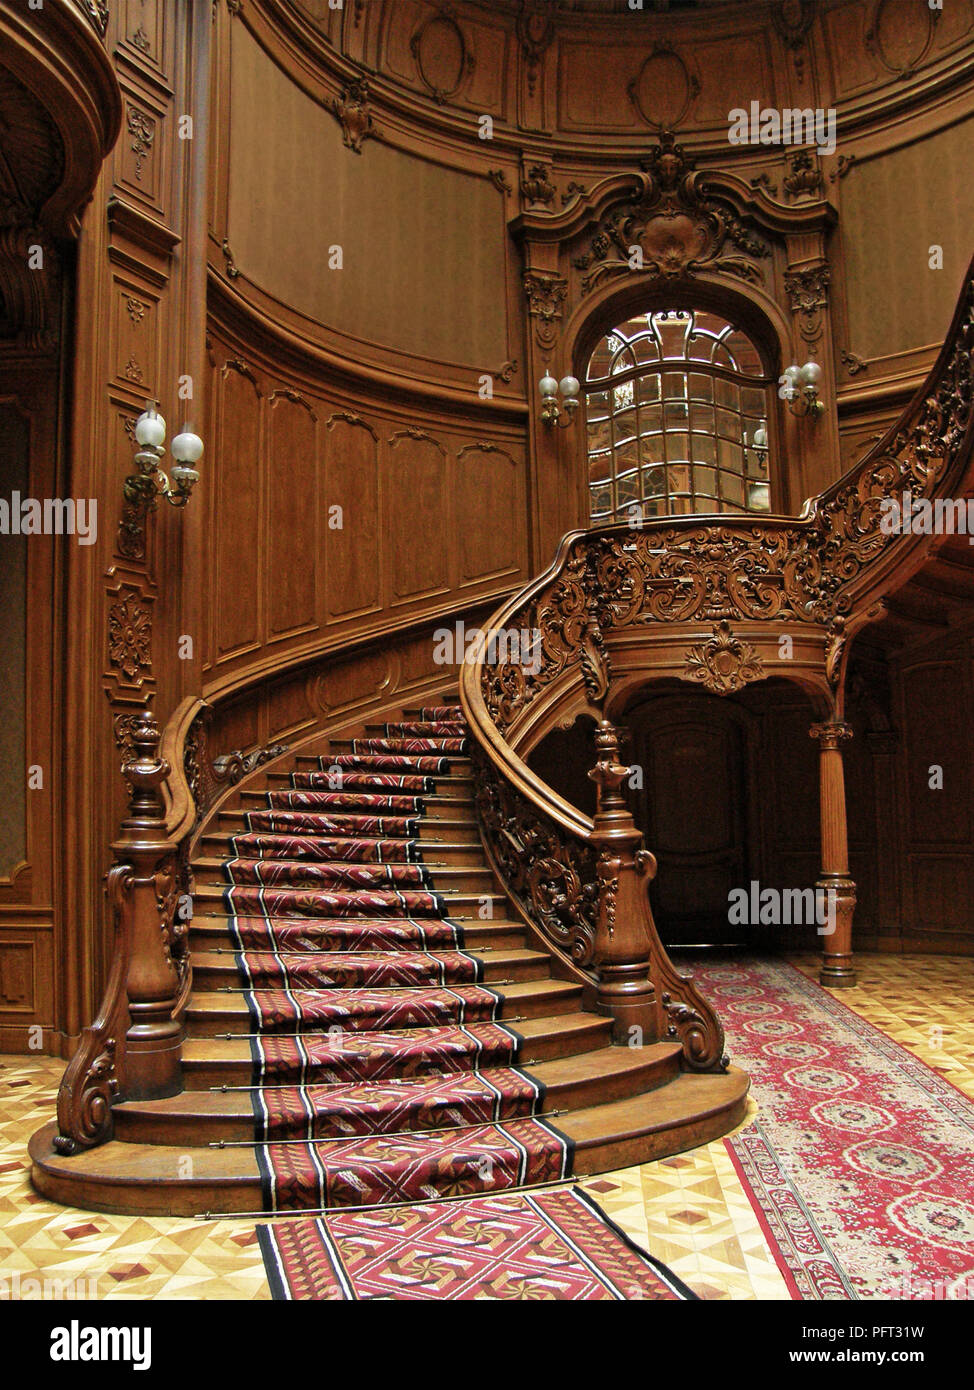 LVIV, UKRAINE - MAY 1: A carved wooden staircase in ancient casino on May 1, 2010 in Lviv, Ukraine Stock Photo